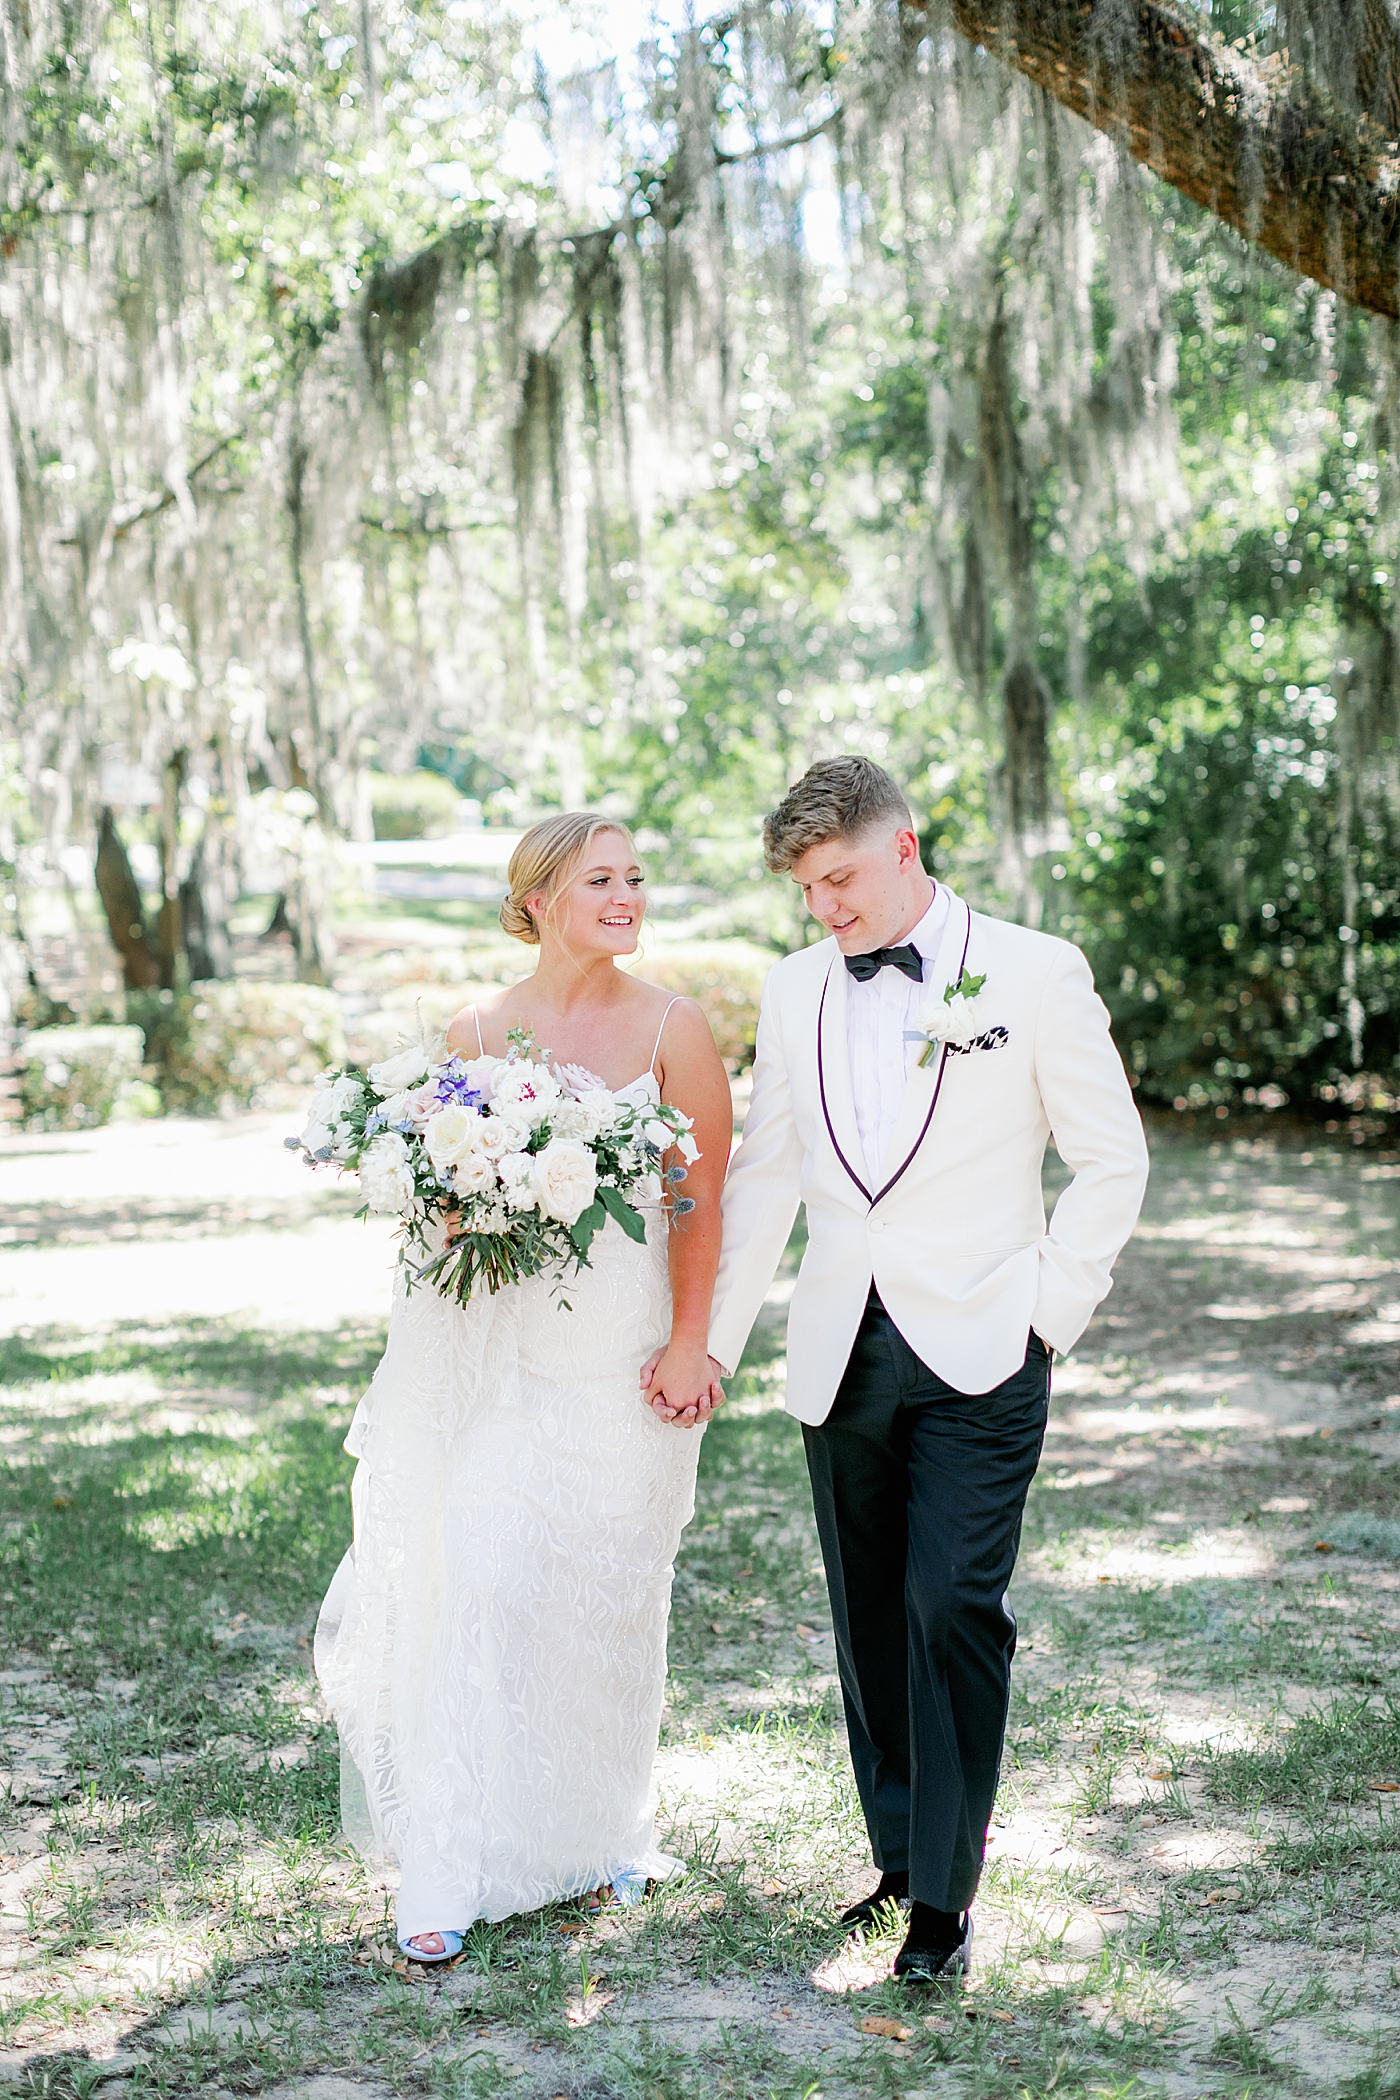 Bride and groom walking hand in hand | Images by Annie Laura Photography